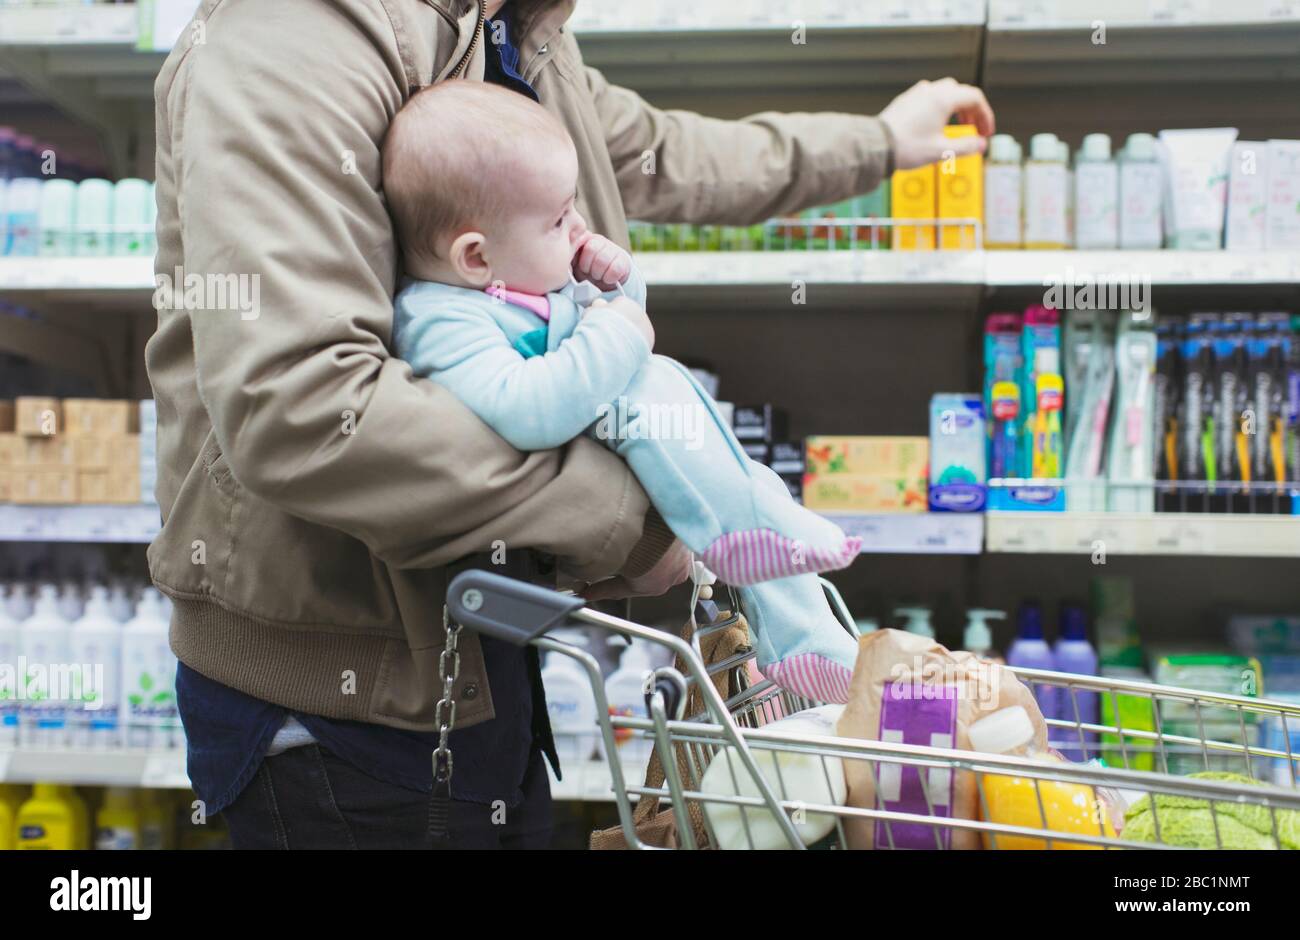 Father with baby shopping in supermarket Stock Photo